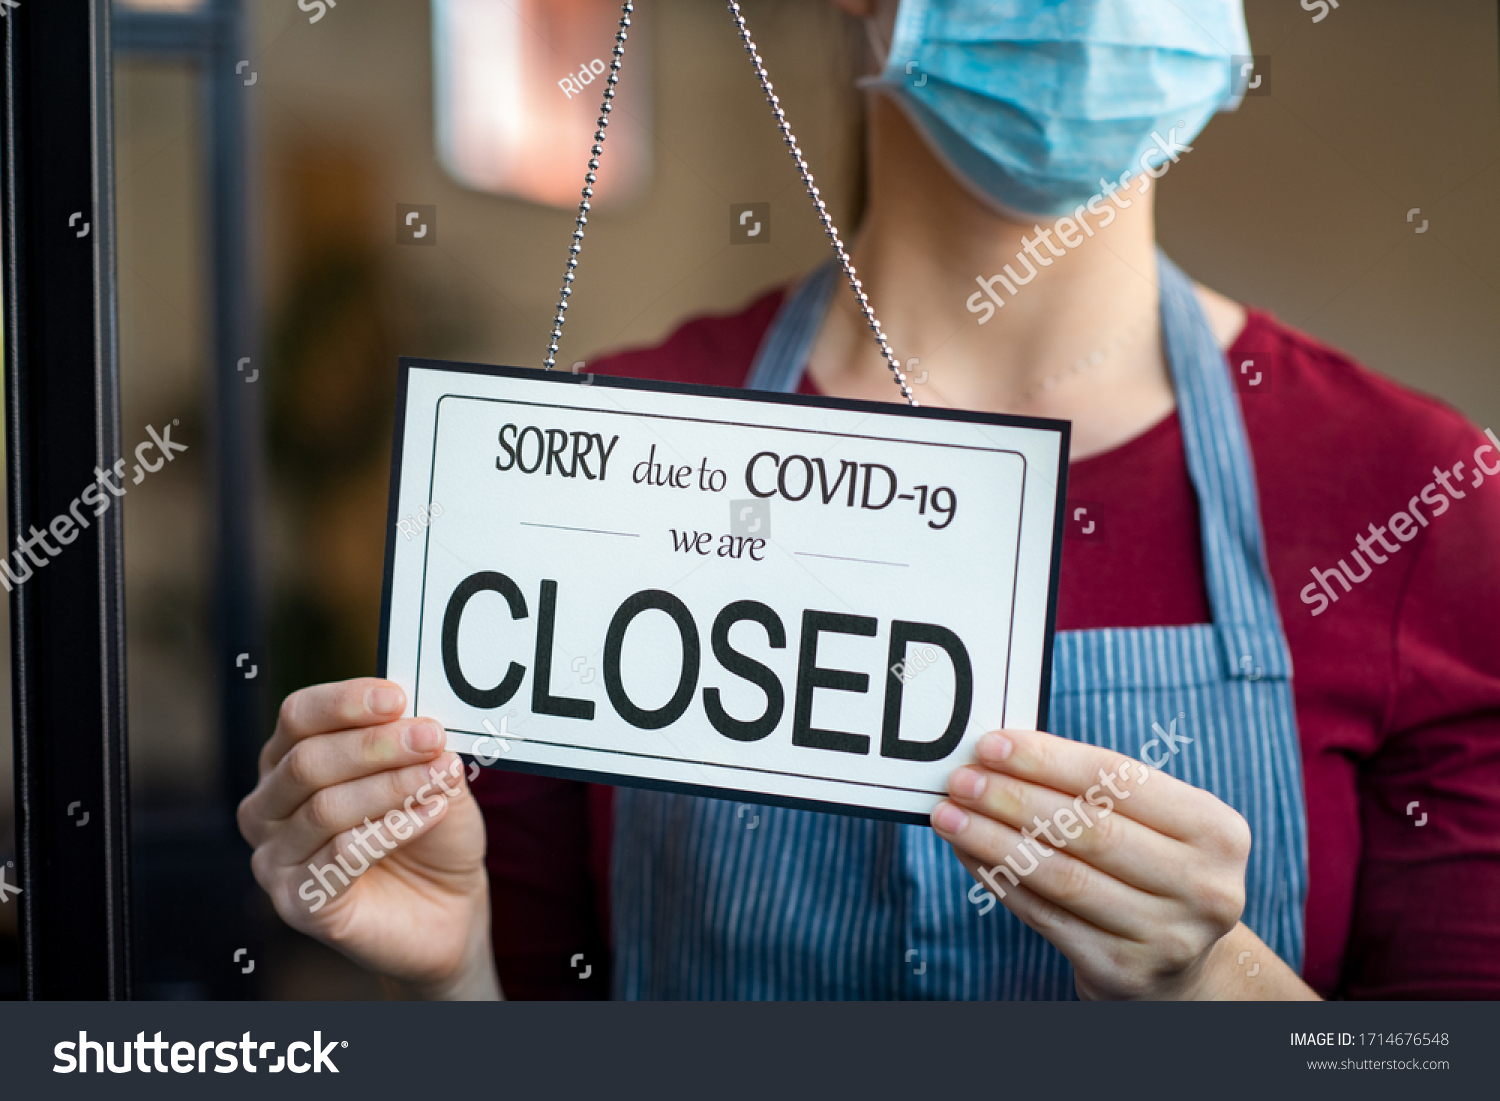 Businesswoman closing her business activity due to covid-19 lockdown. Owner with surgical mask close the doors of her store due to quarantine coronavirus. Close up sign due to the effect of COVID-19. #1714676548